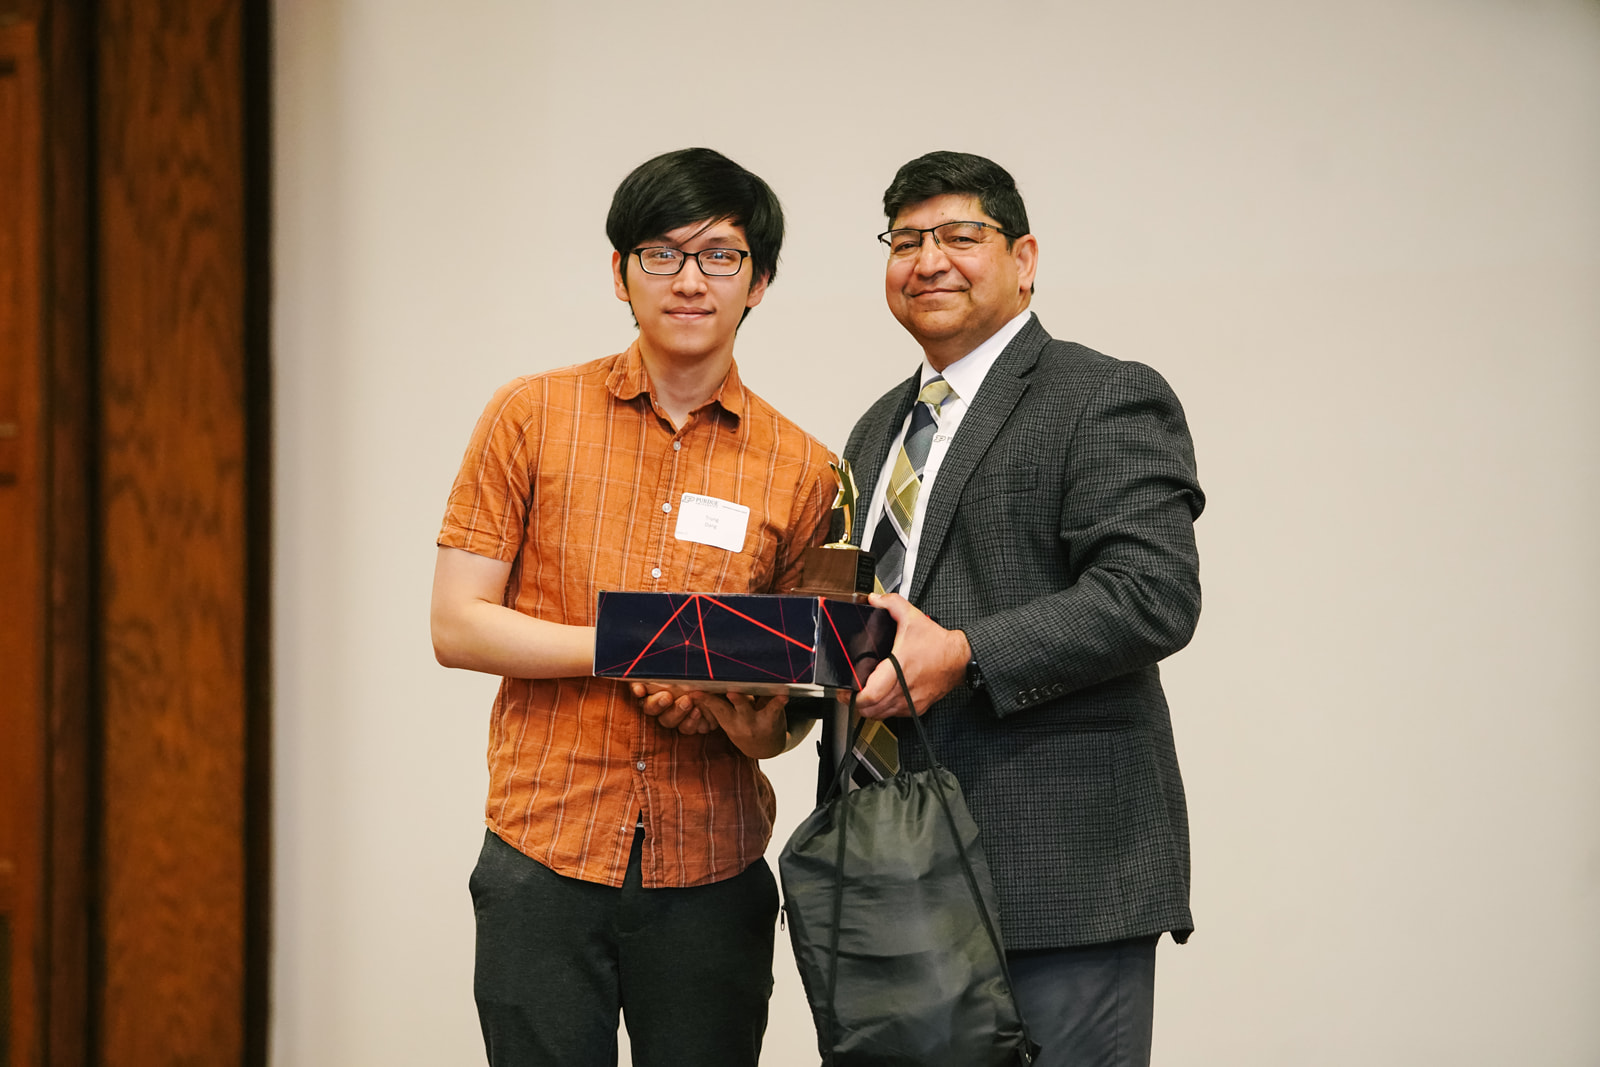 Trung Dang, Outstanding Senior in the Computer Science Major